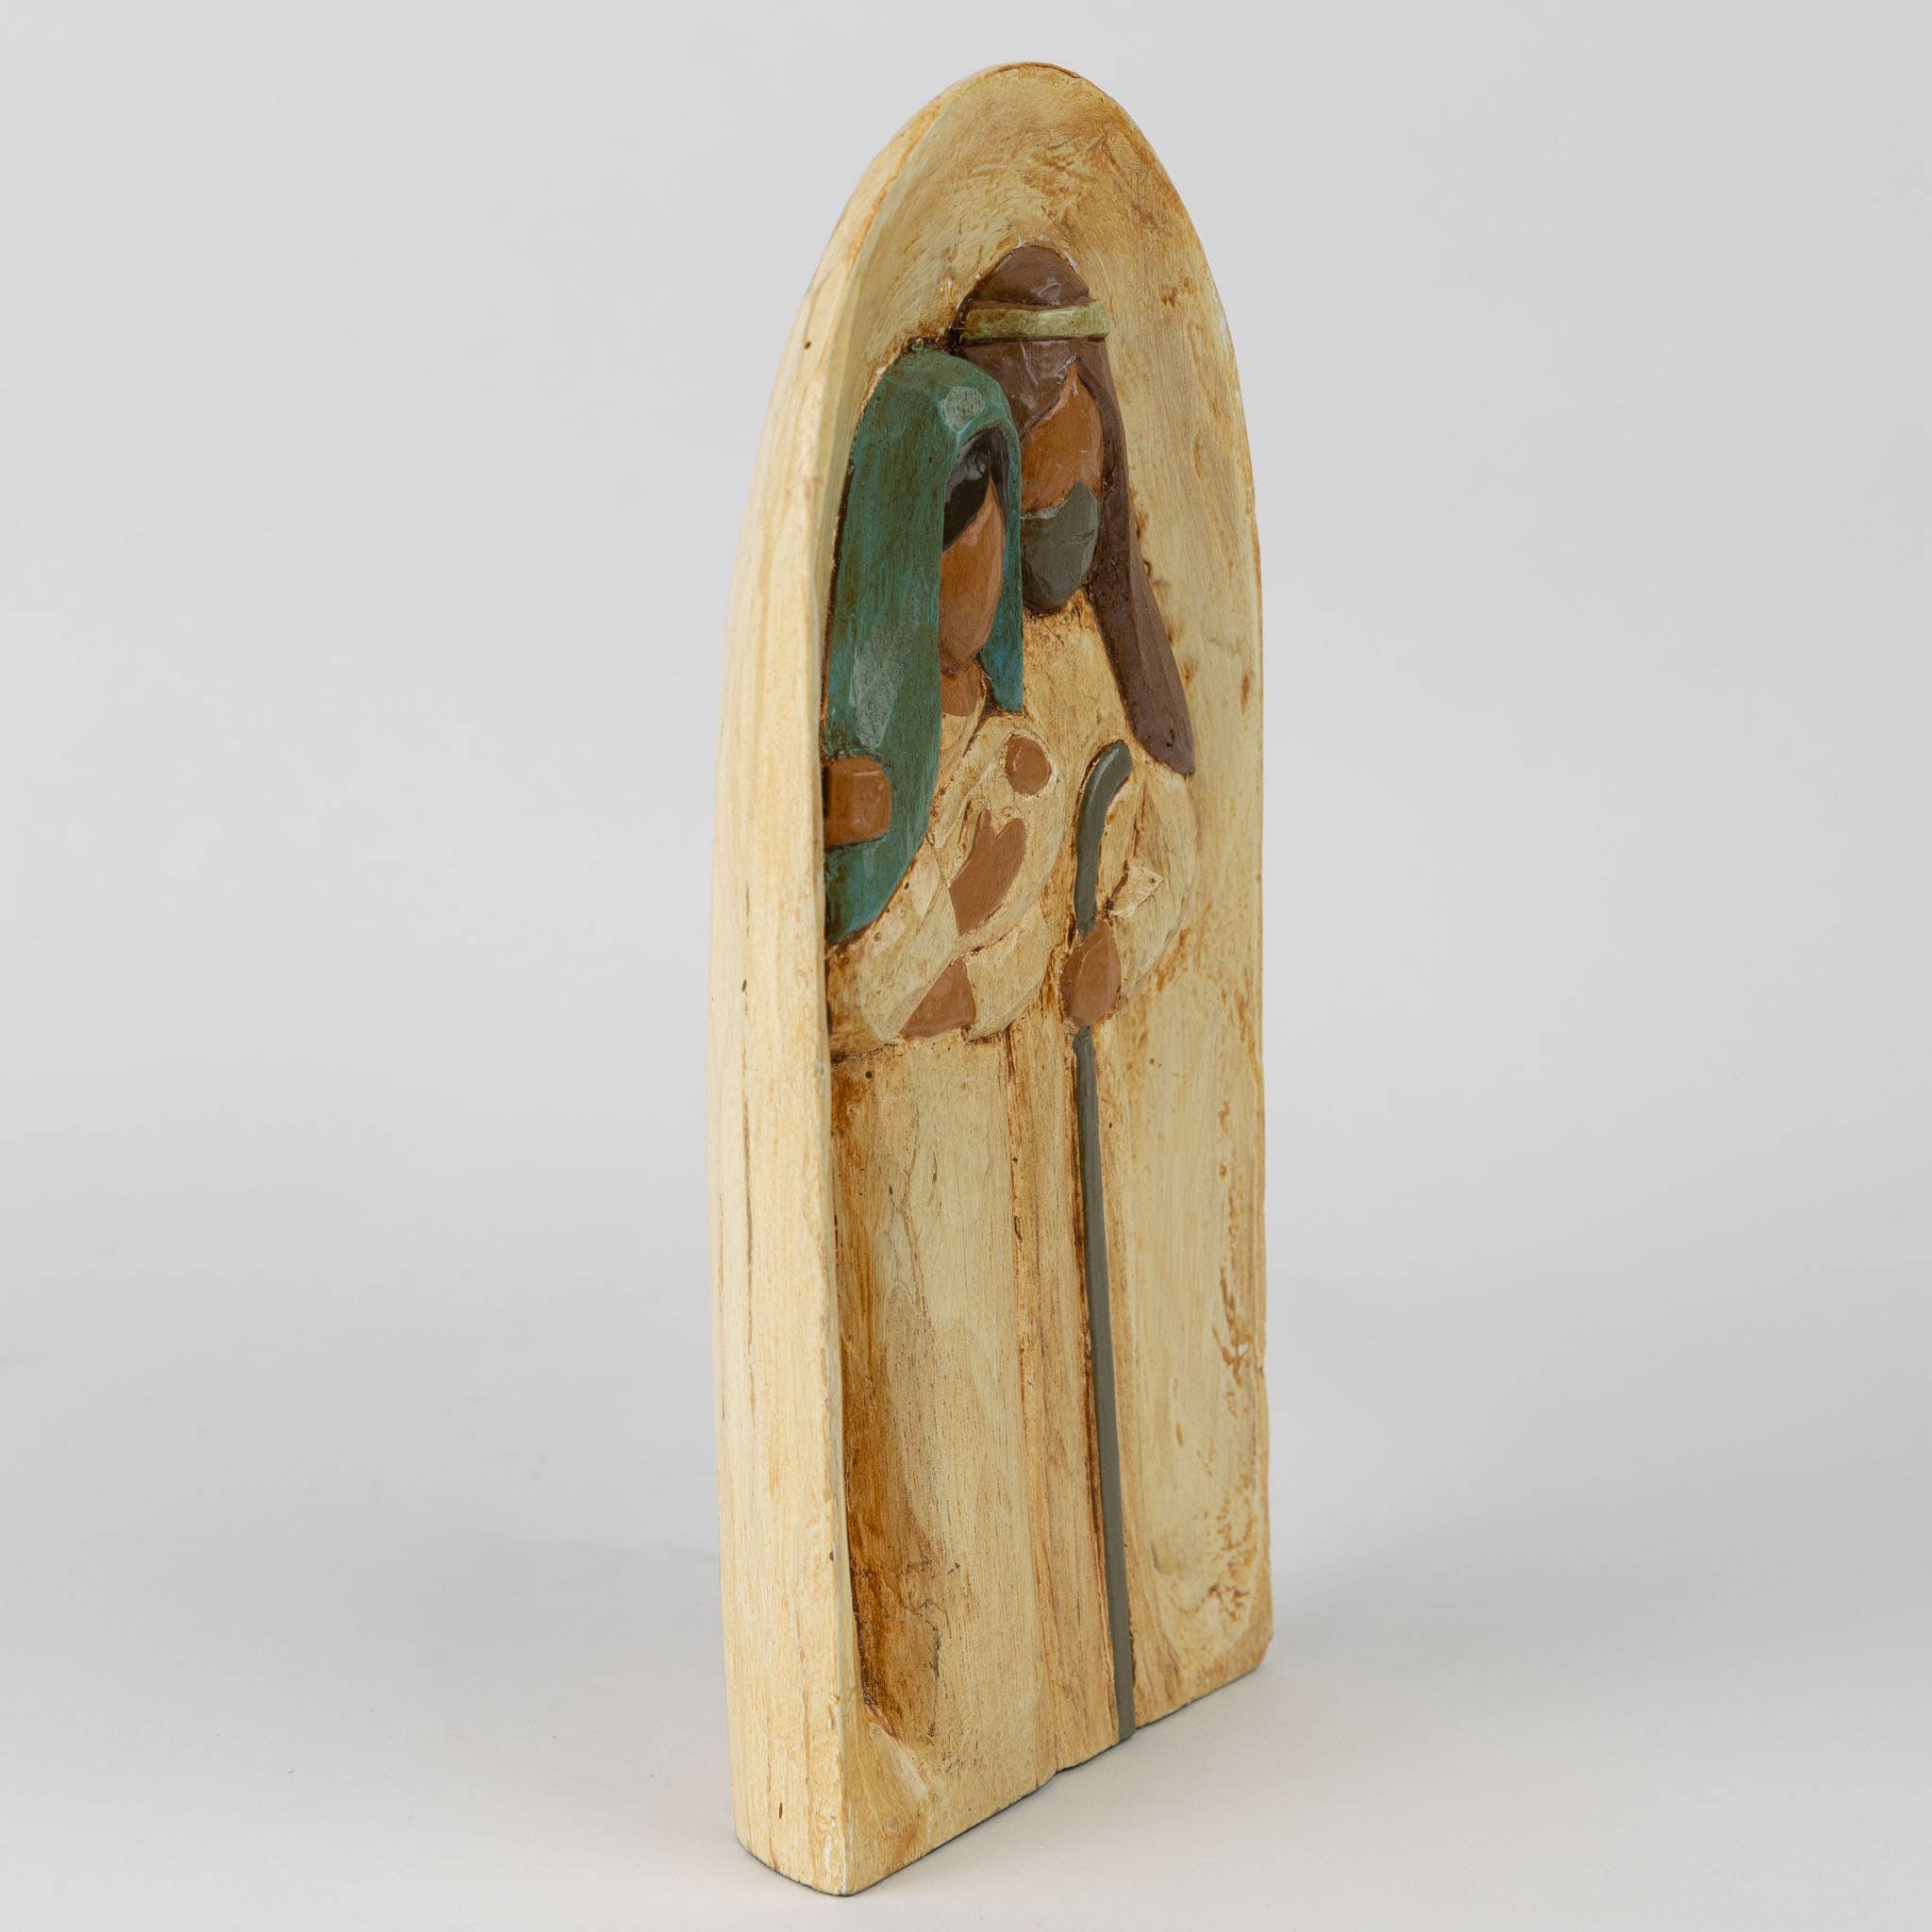 Holy Family Wood Carving